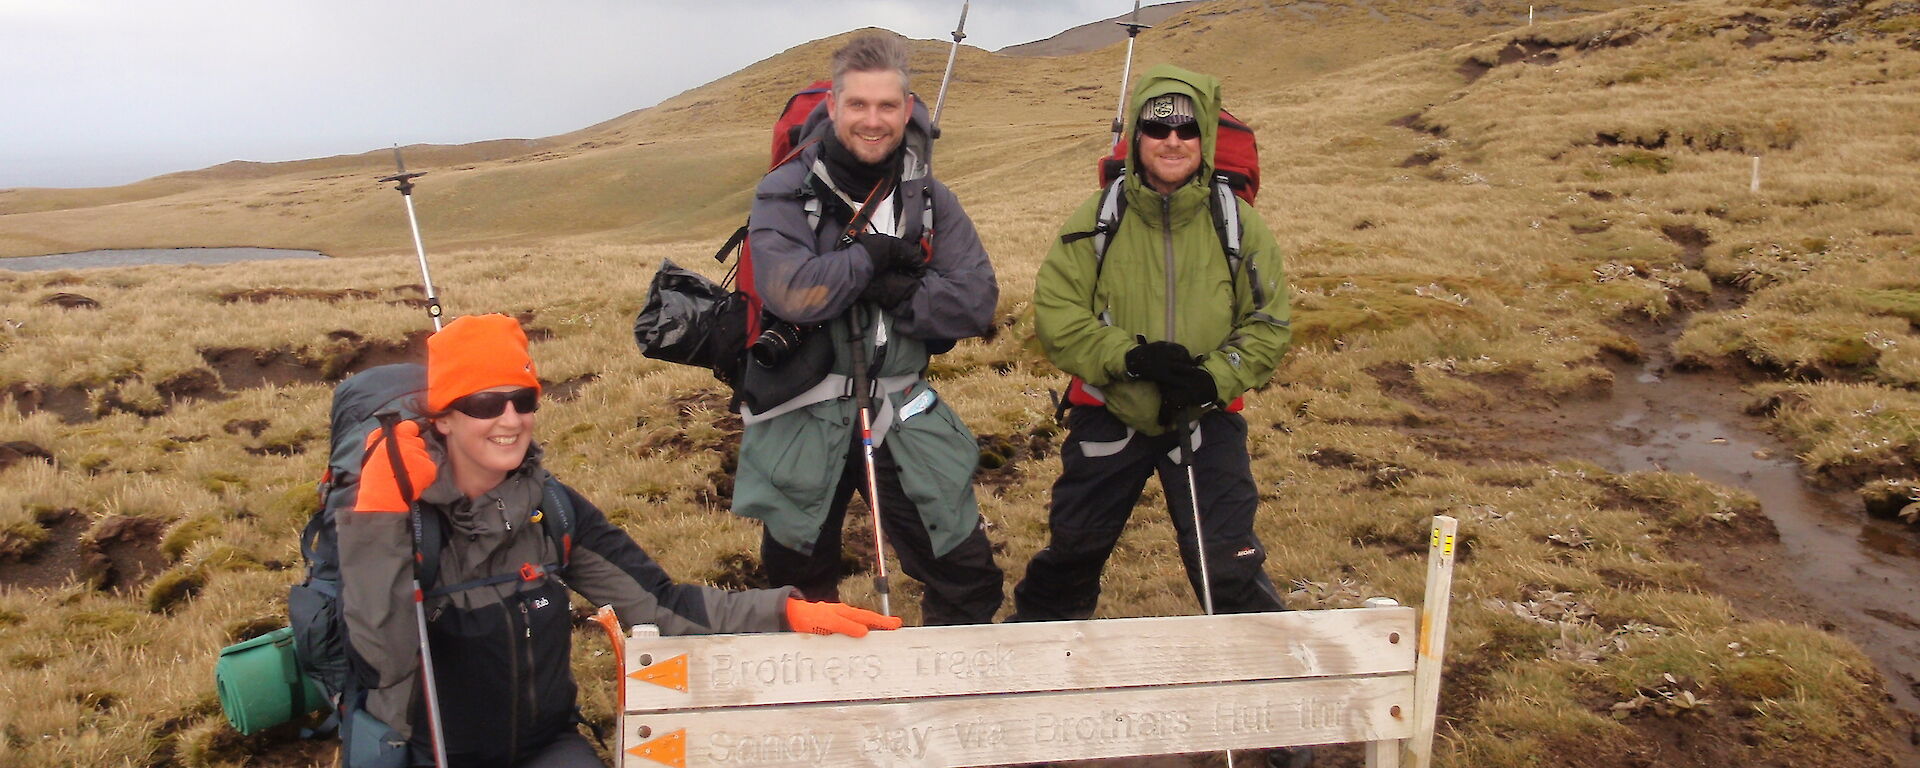 Three expeditioners pose beside a walking track sign